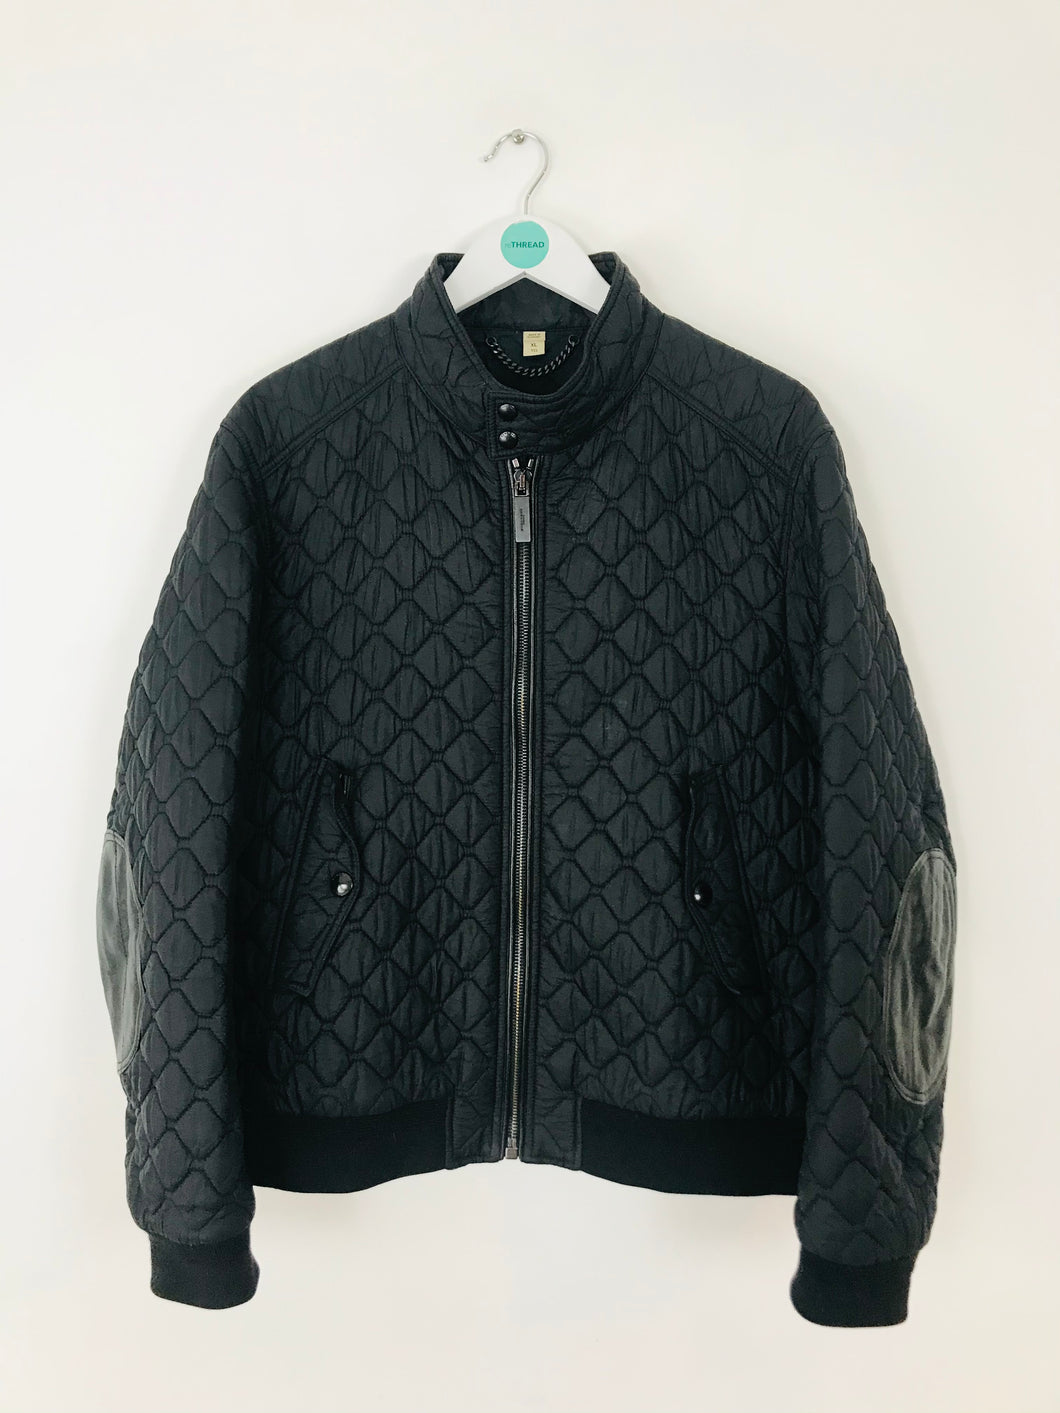 Burberry London Men’s Quilted Bomber Jacket | XL | Black